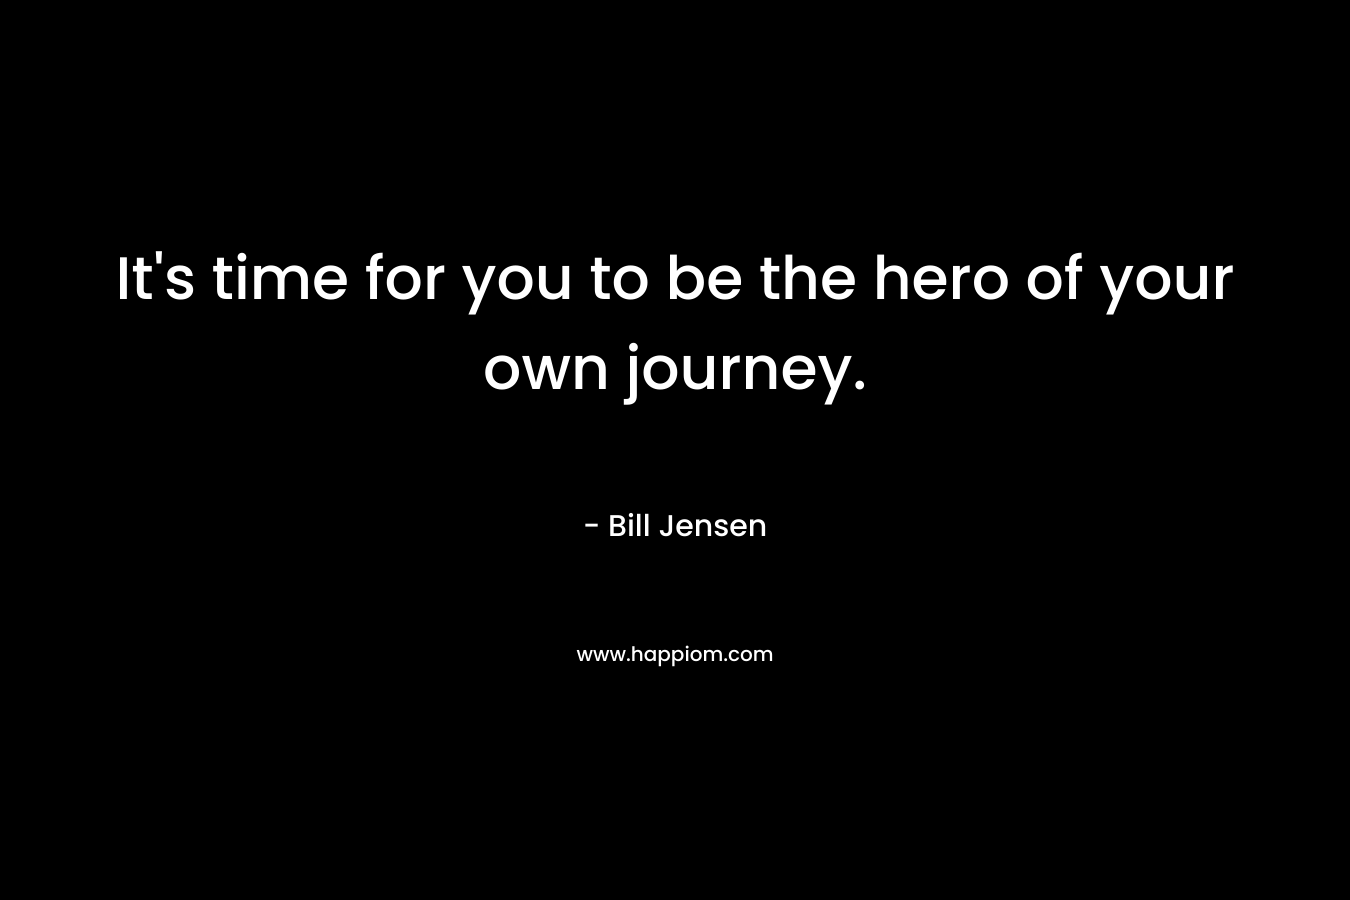 It's time for you to be the hero of your own journey.